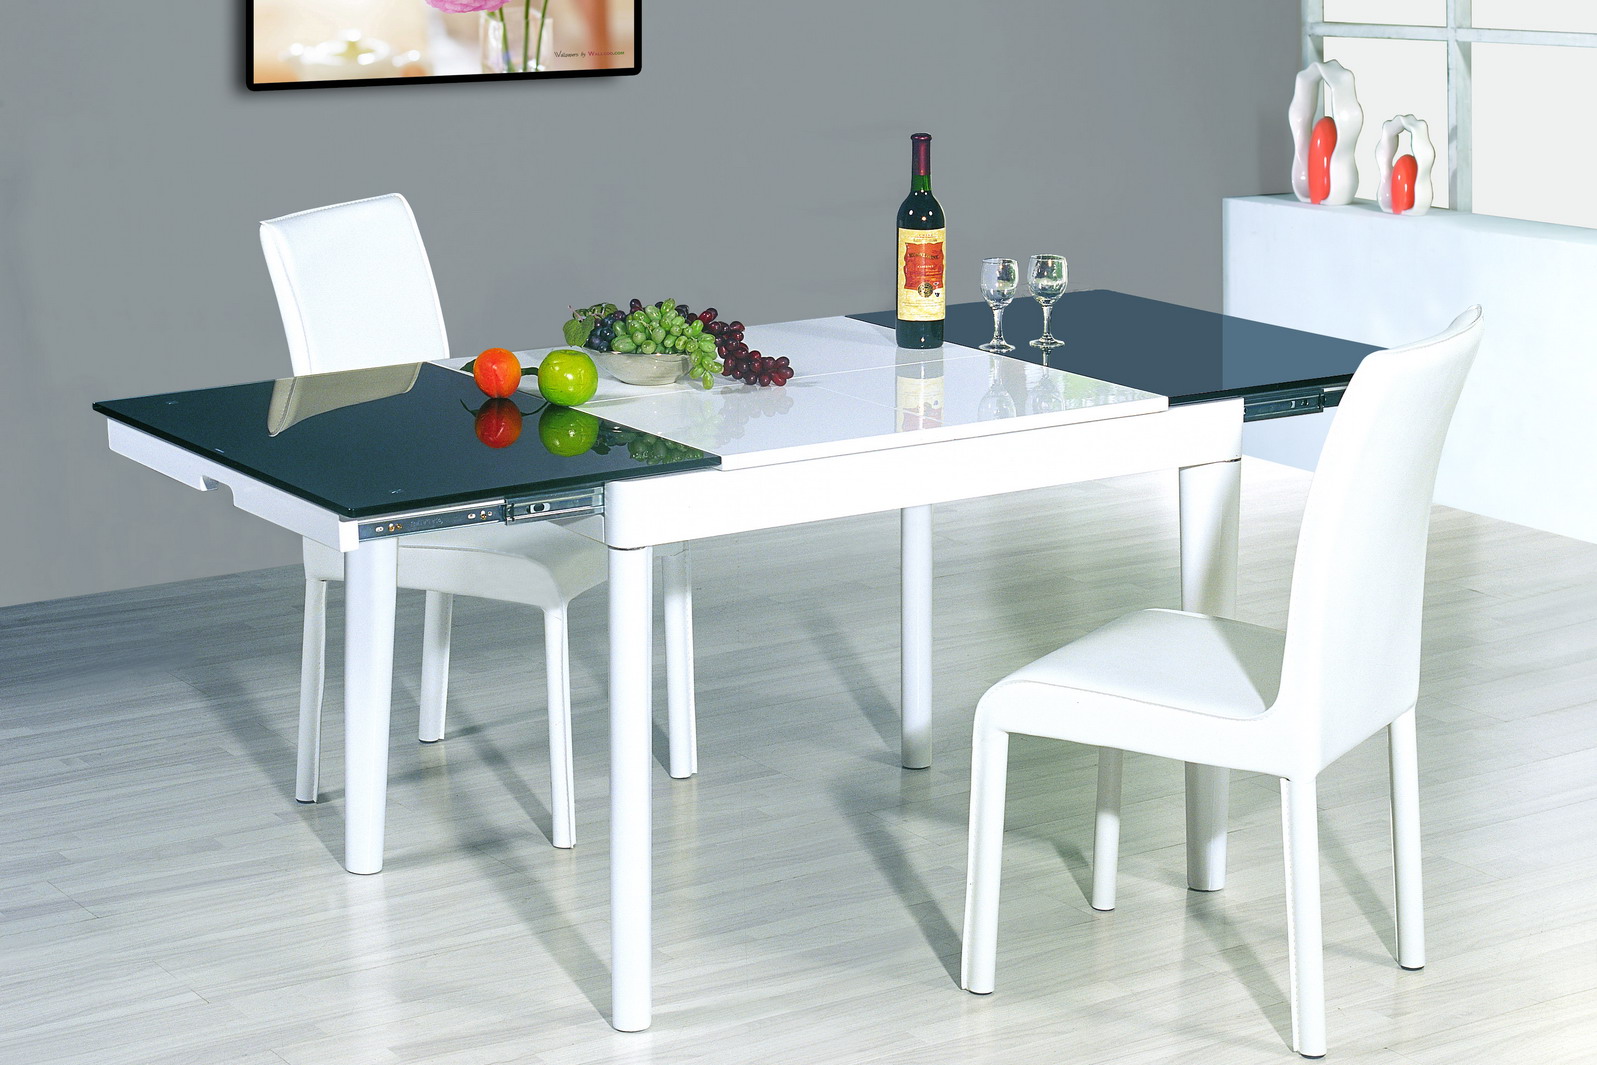 Contemporary Dining With Cool Contemporary Dining Room Sets With White Chairs Furnished With Folding Table Of White Furniture Completed With Beverage And Fruits Table Decorations Dining Room The Design Contemporary Dining Room Sets